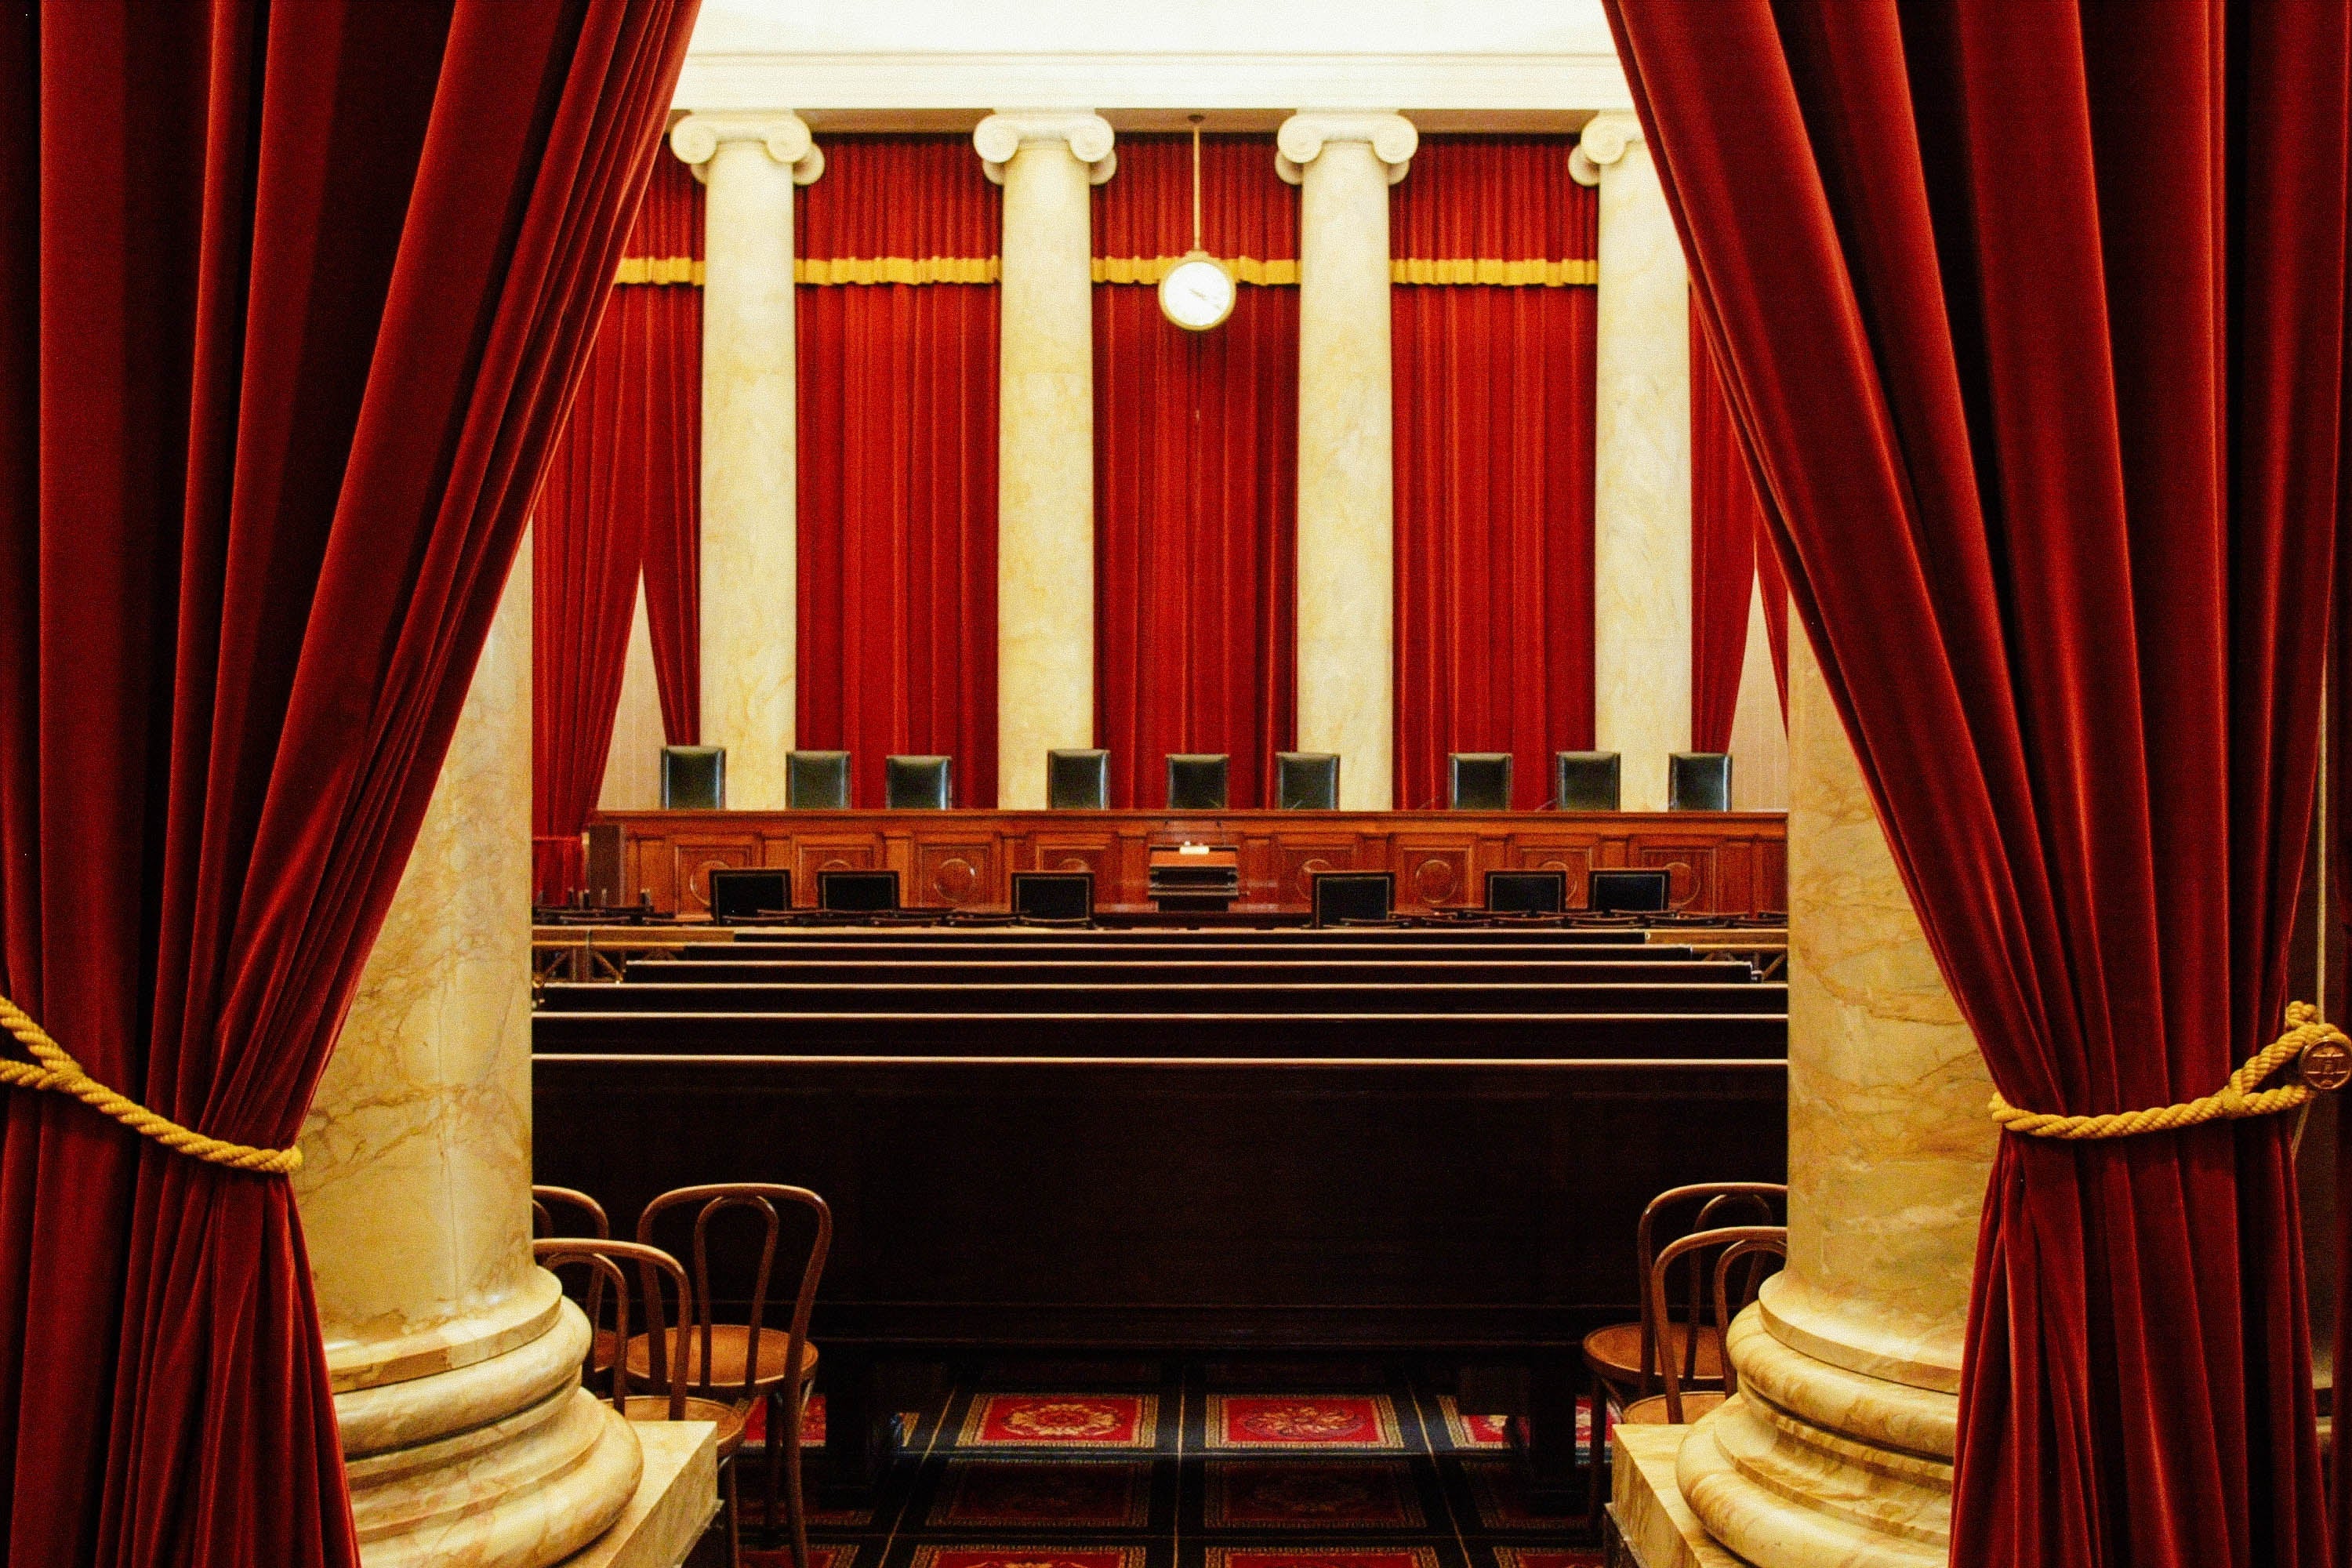 An interior view of the courtroom of the U.S. Supreme Court.